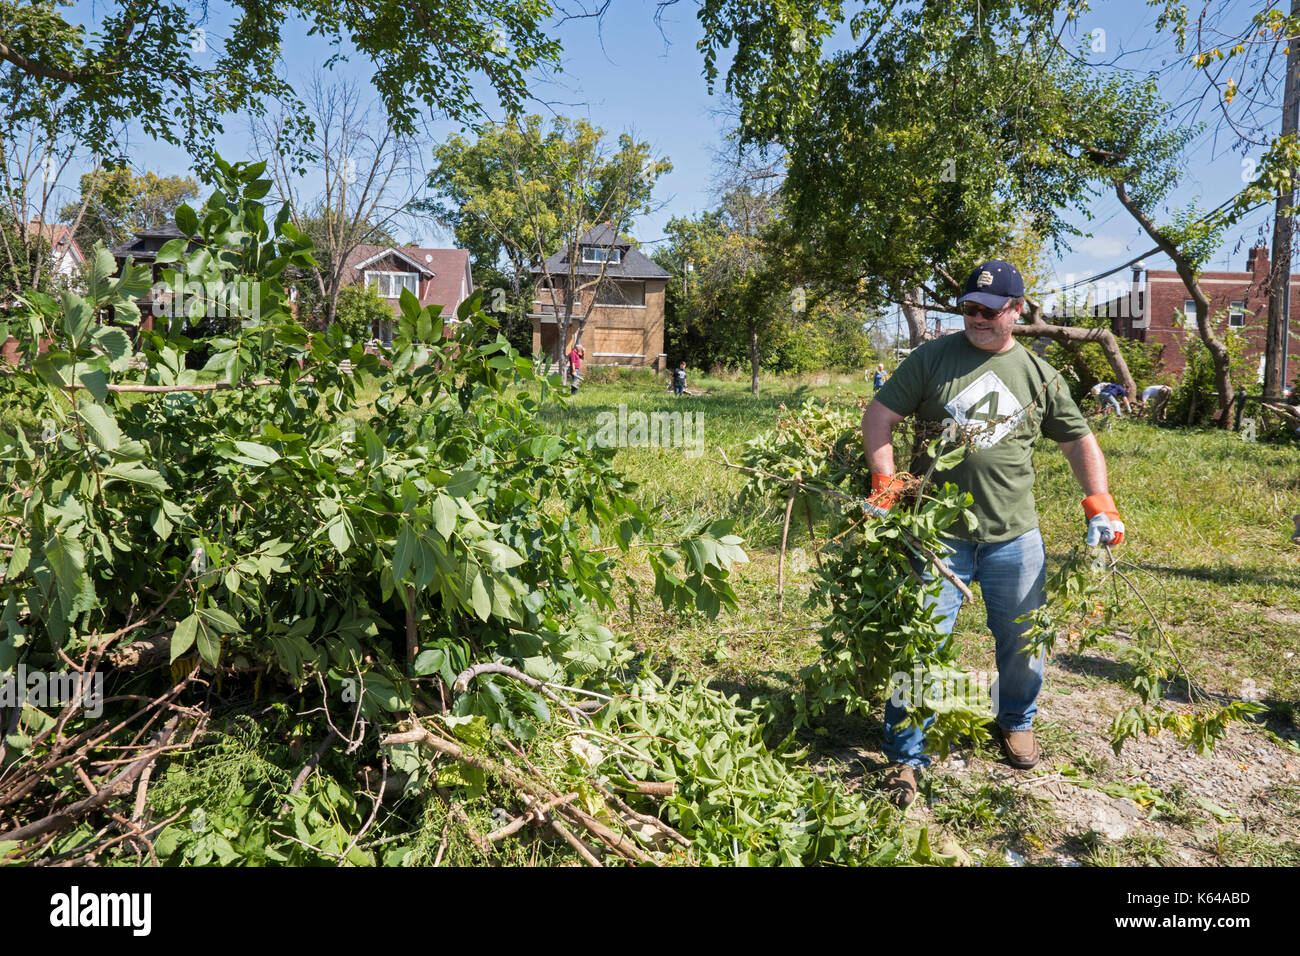 Detroit, Michigan - Community residents and members of the Knights of Columbus clean trash and brush from vacant lots in the Morningside neighborhood. Stock Photo